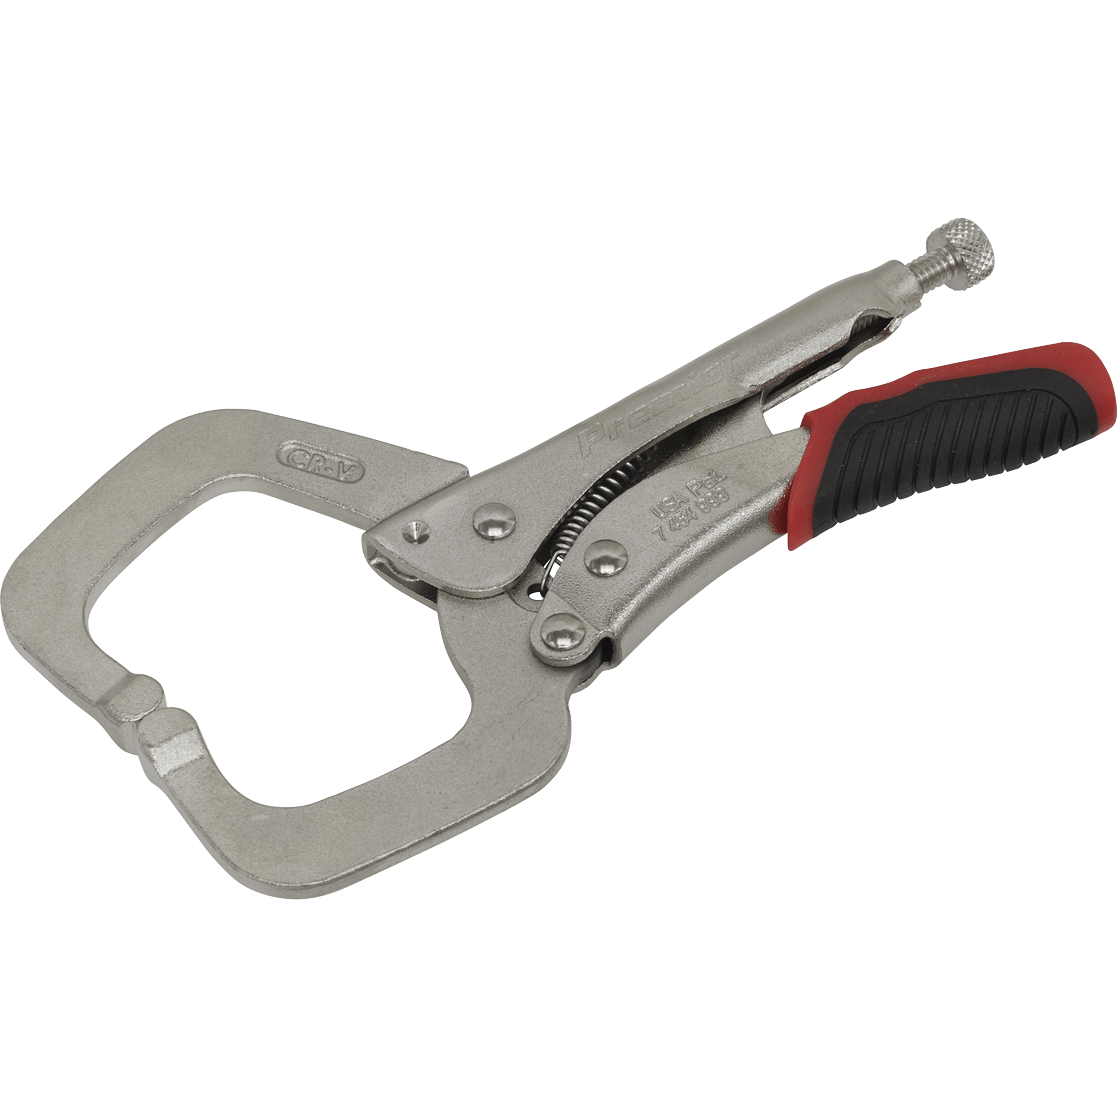 Sealey Locking C Clamp Pliers 50mm